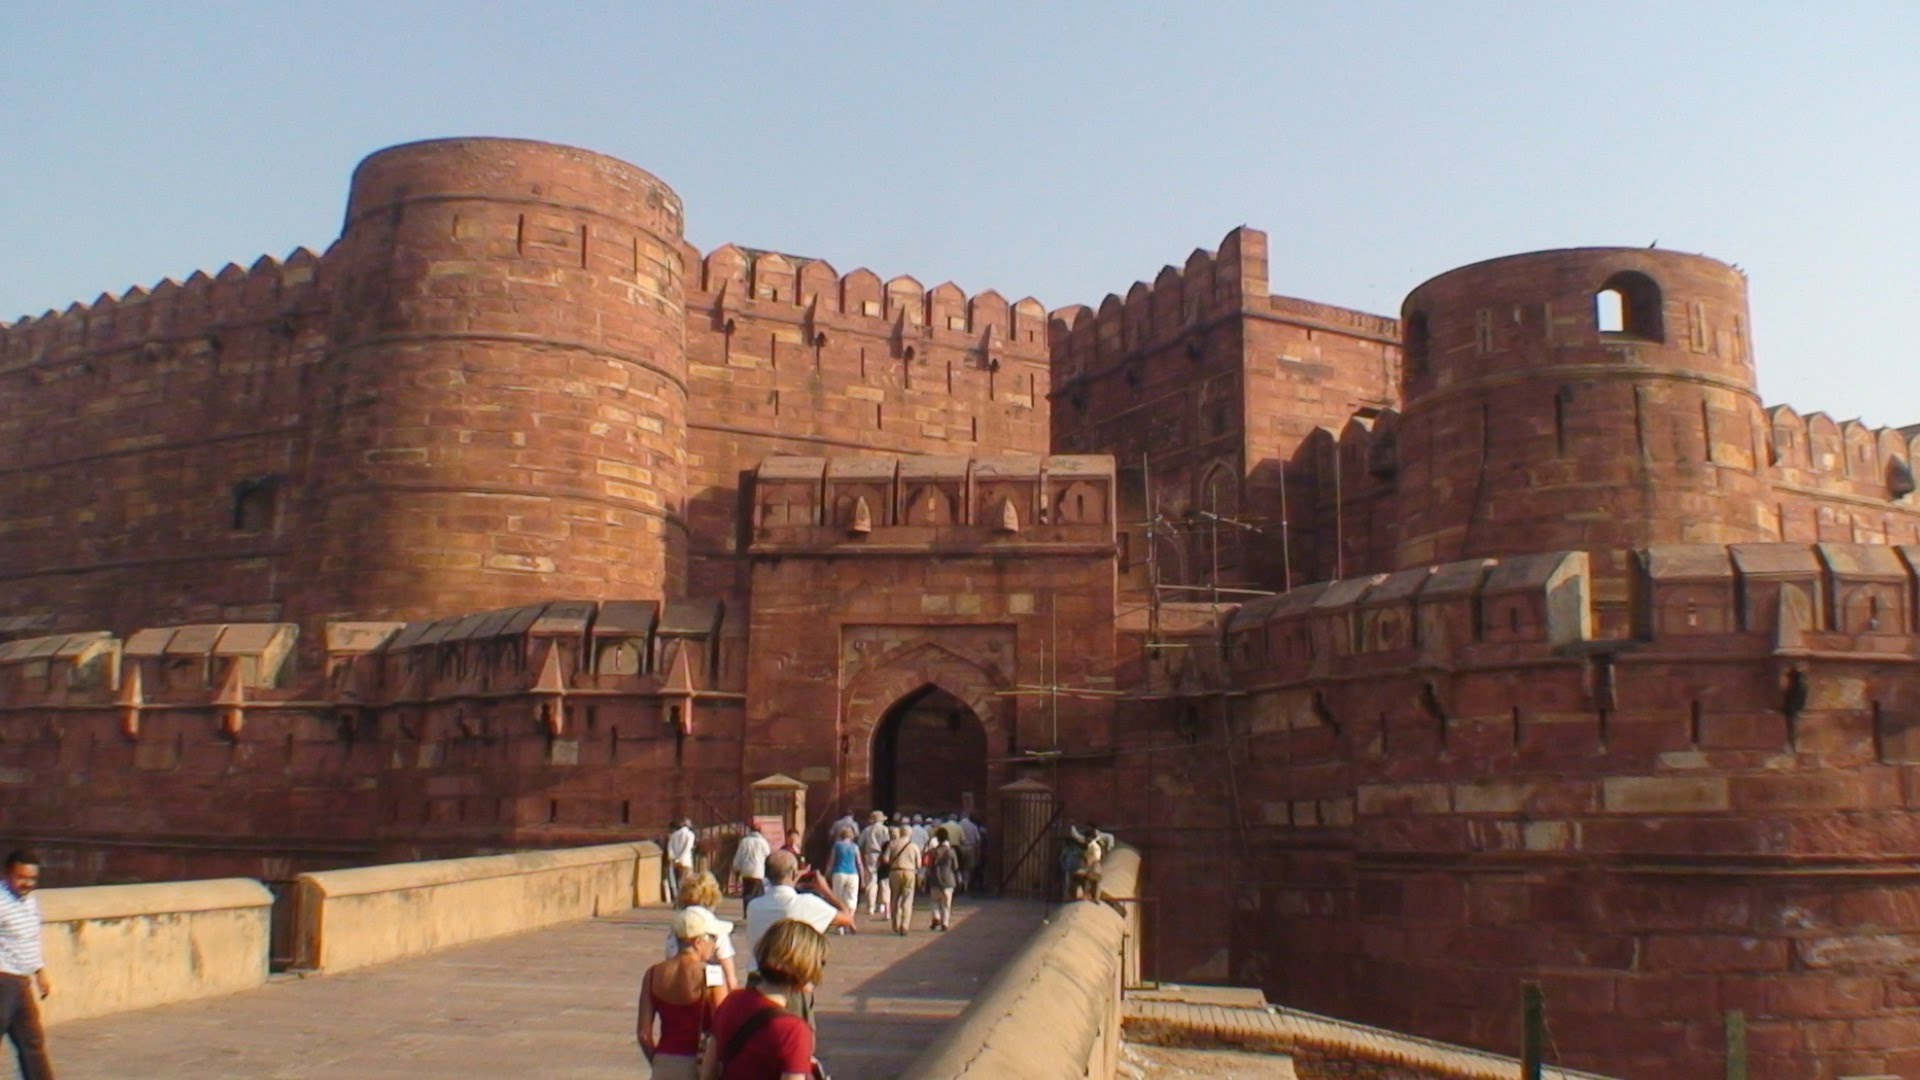 The Agra Red Fort, a Palace of the Mughal Emperors, Agra, India ...